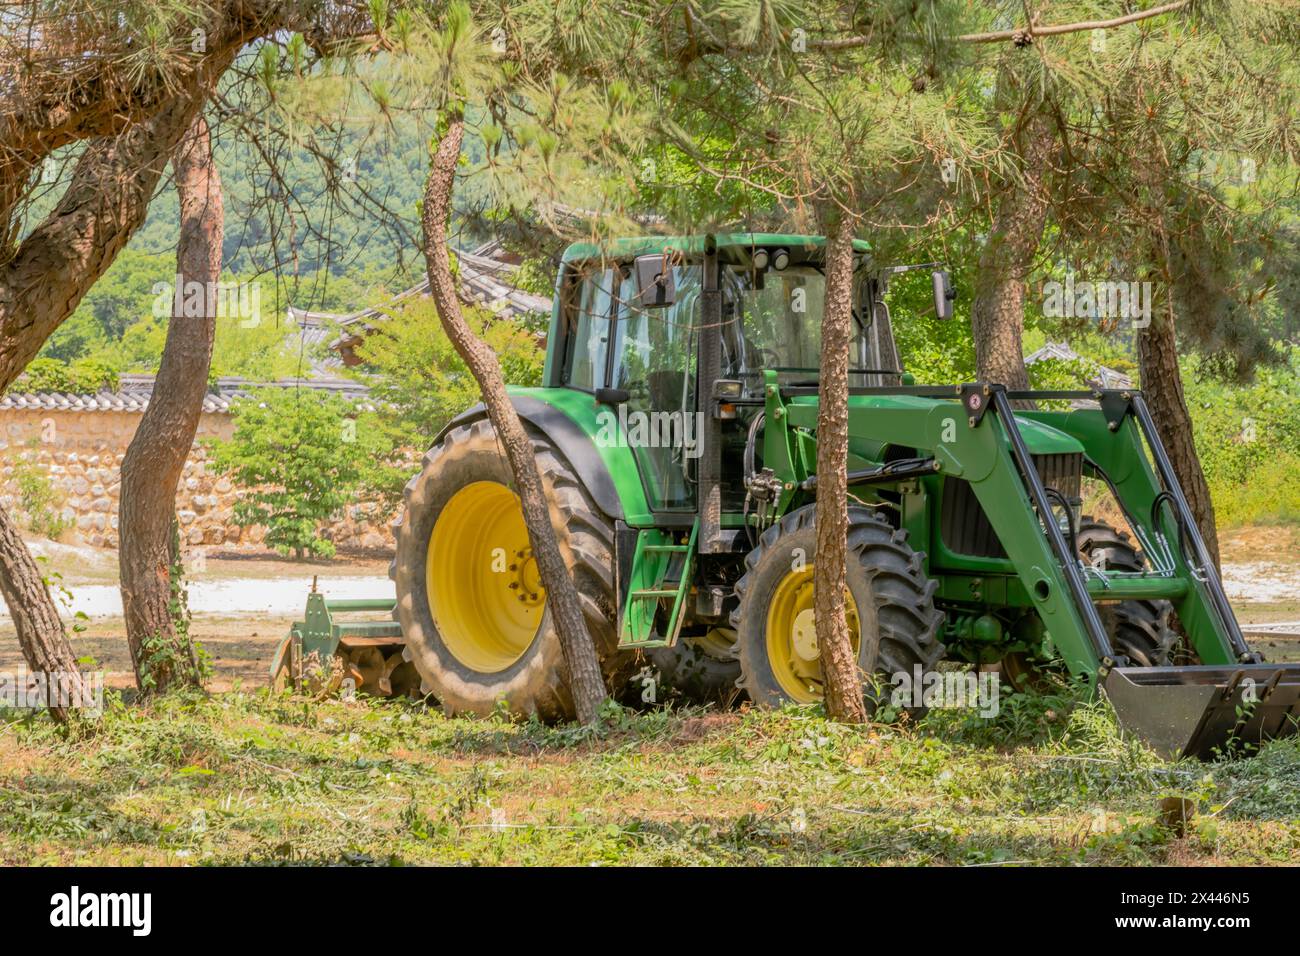 Green tractor with yellow wheels parked in shade of grove of trees in South Korea Stock Photo